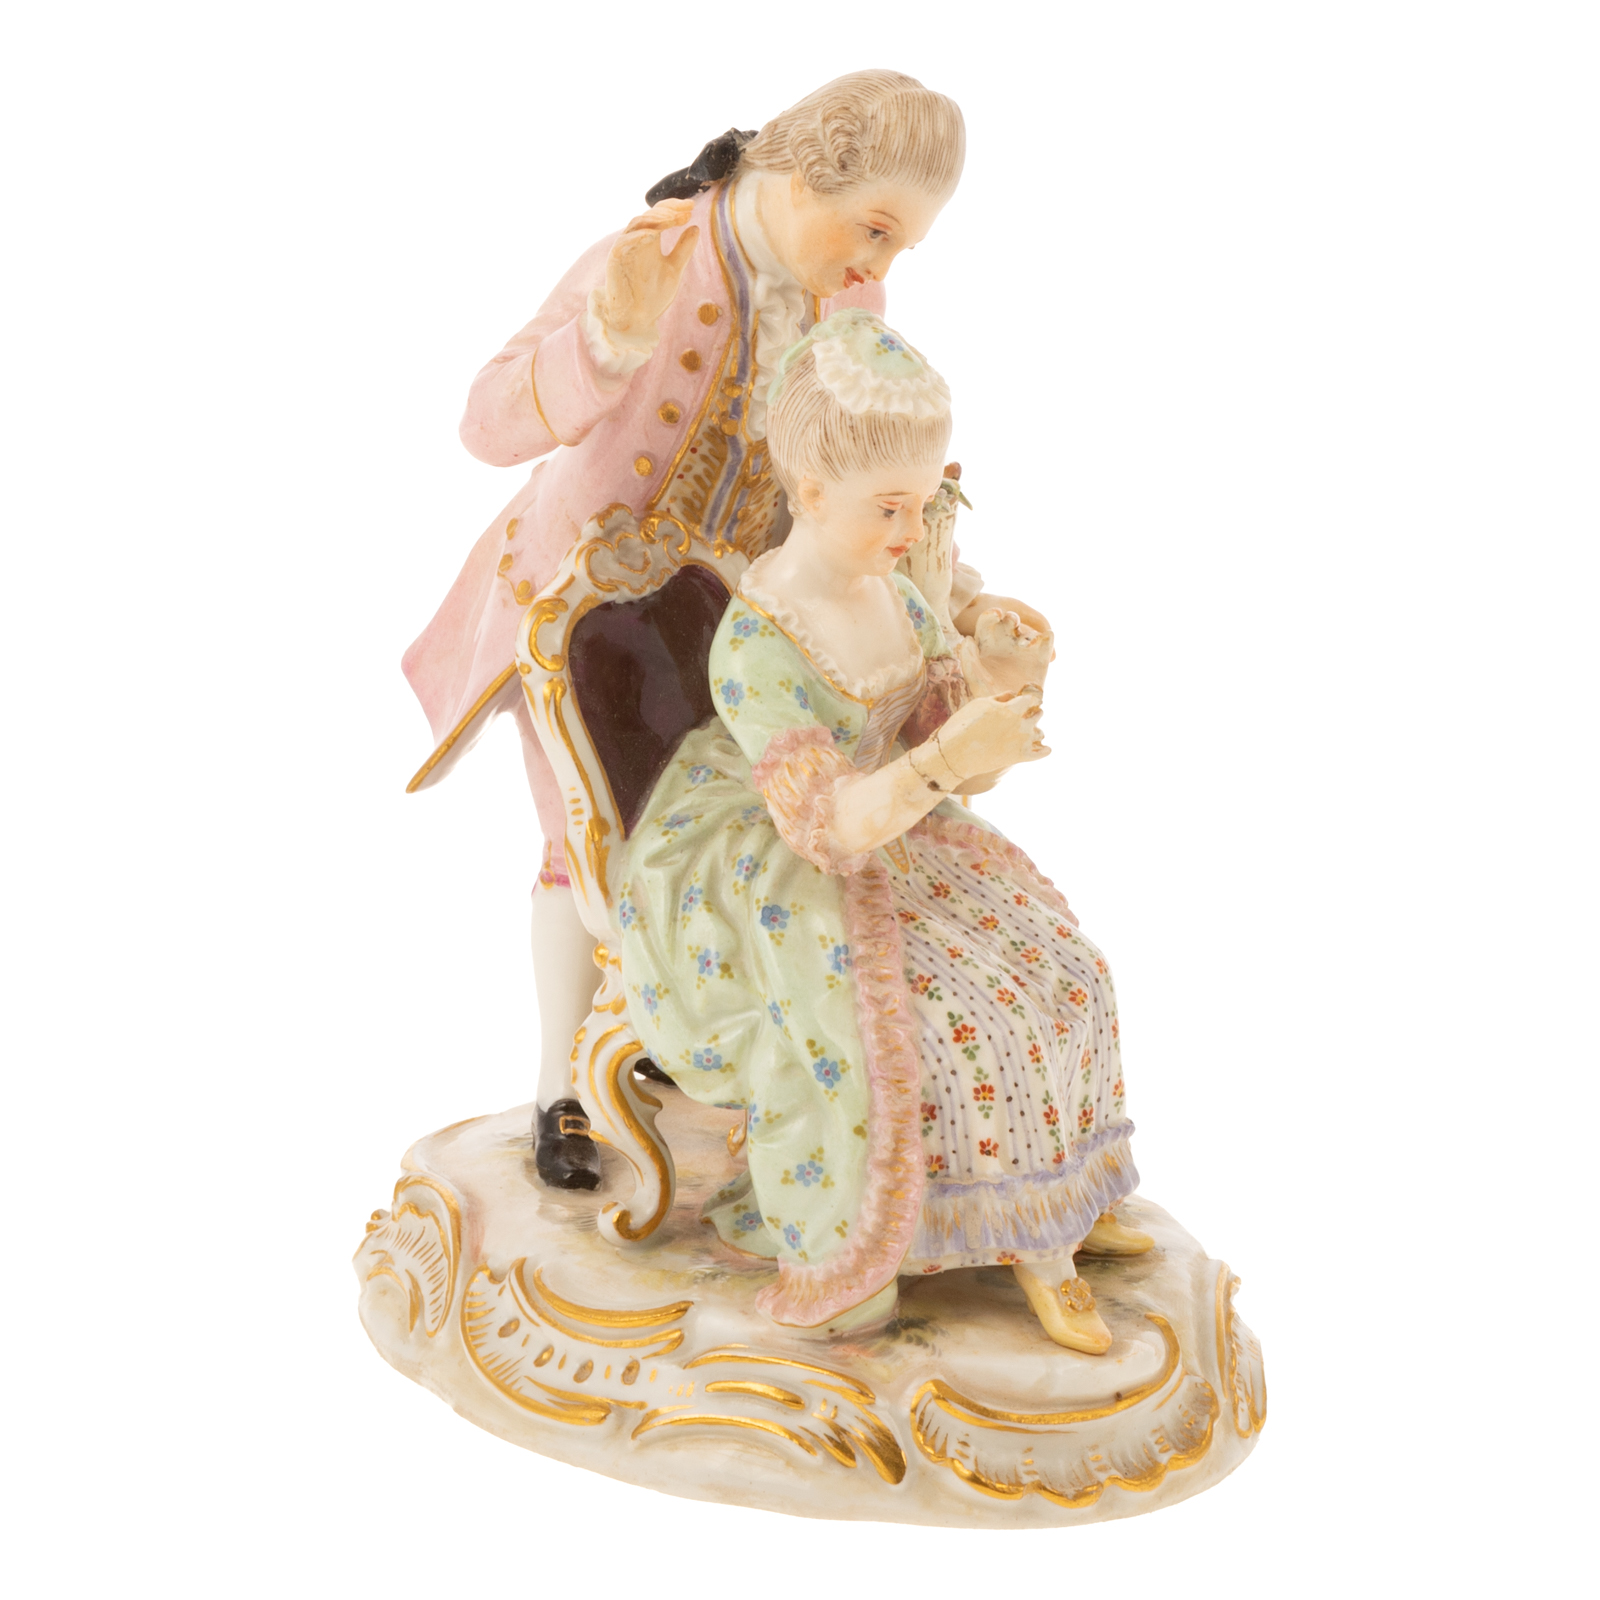 MEISSEN PORCELAIN FIGURAL GROUP Early